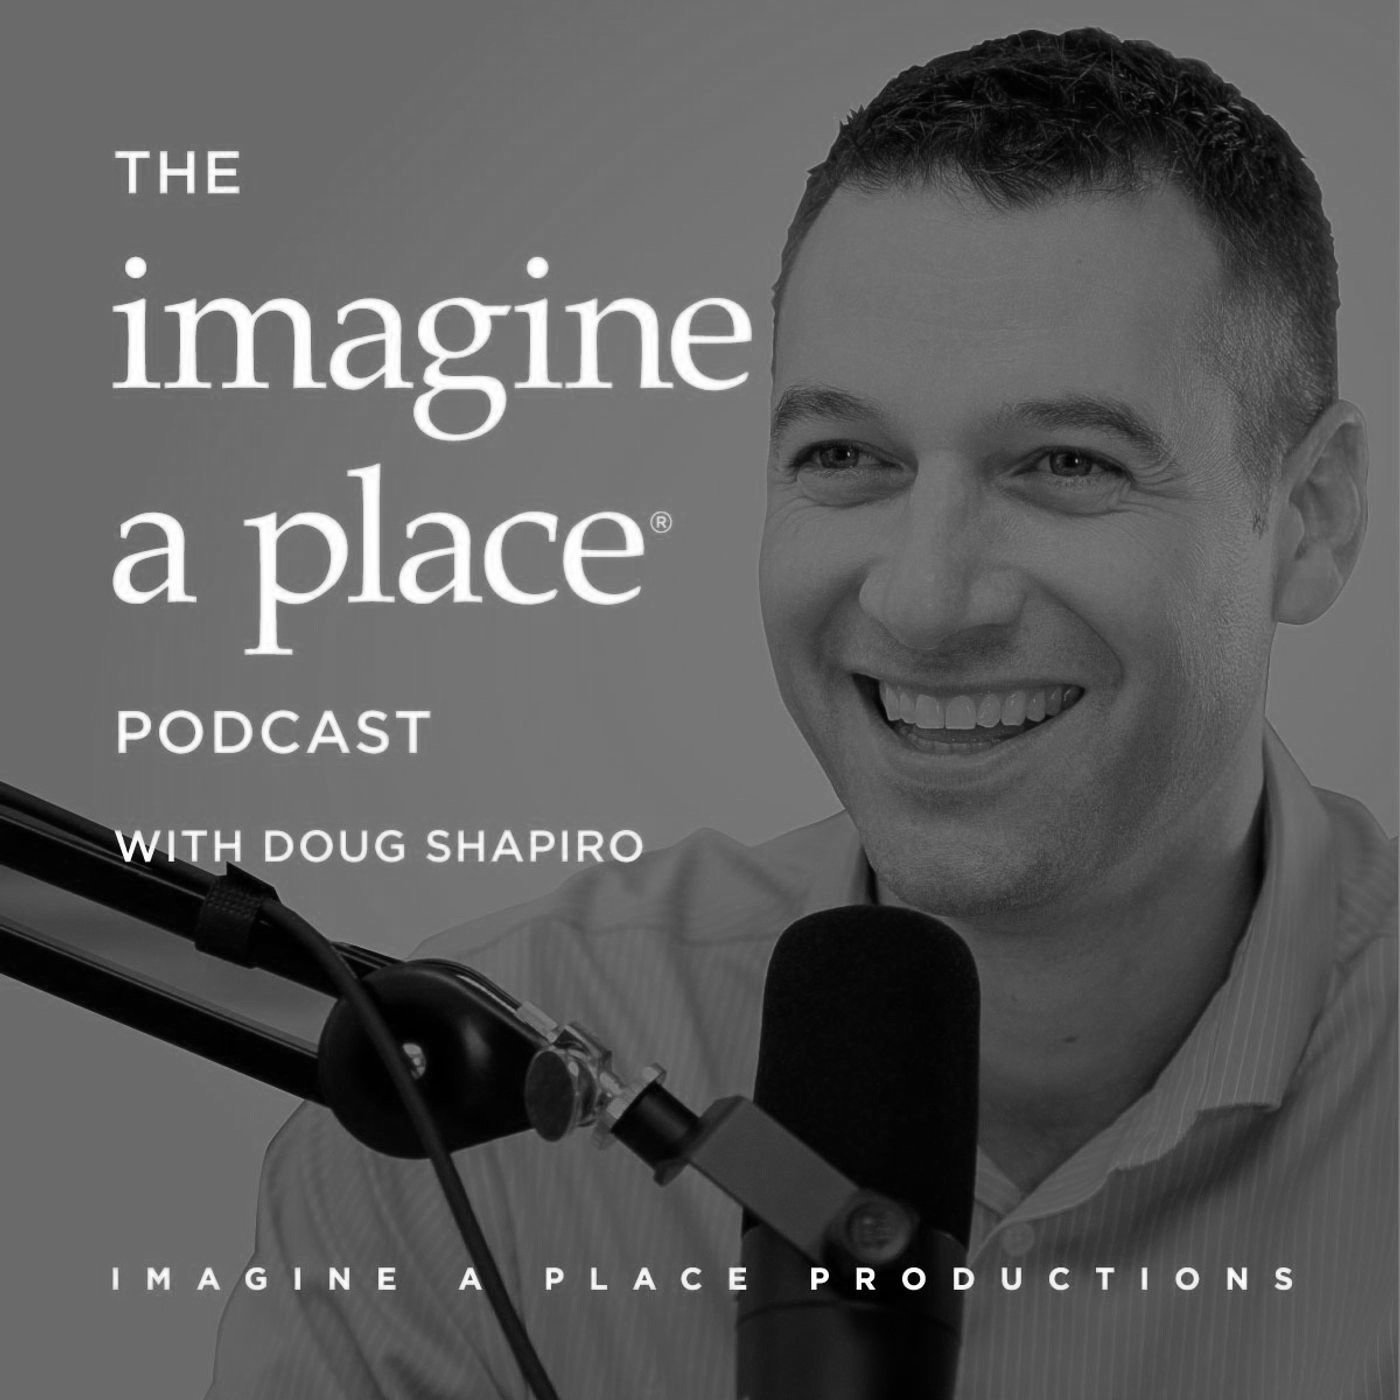 Interview of the award-winning interior designer Ginger Curtis on "Imagine a Place" Podcast